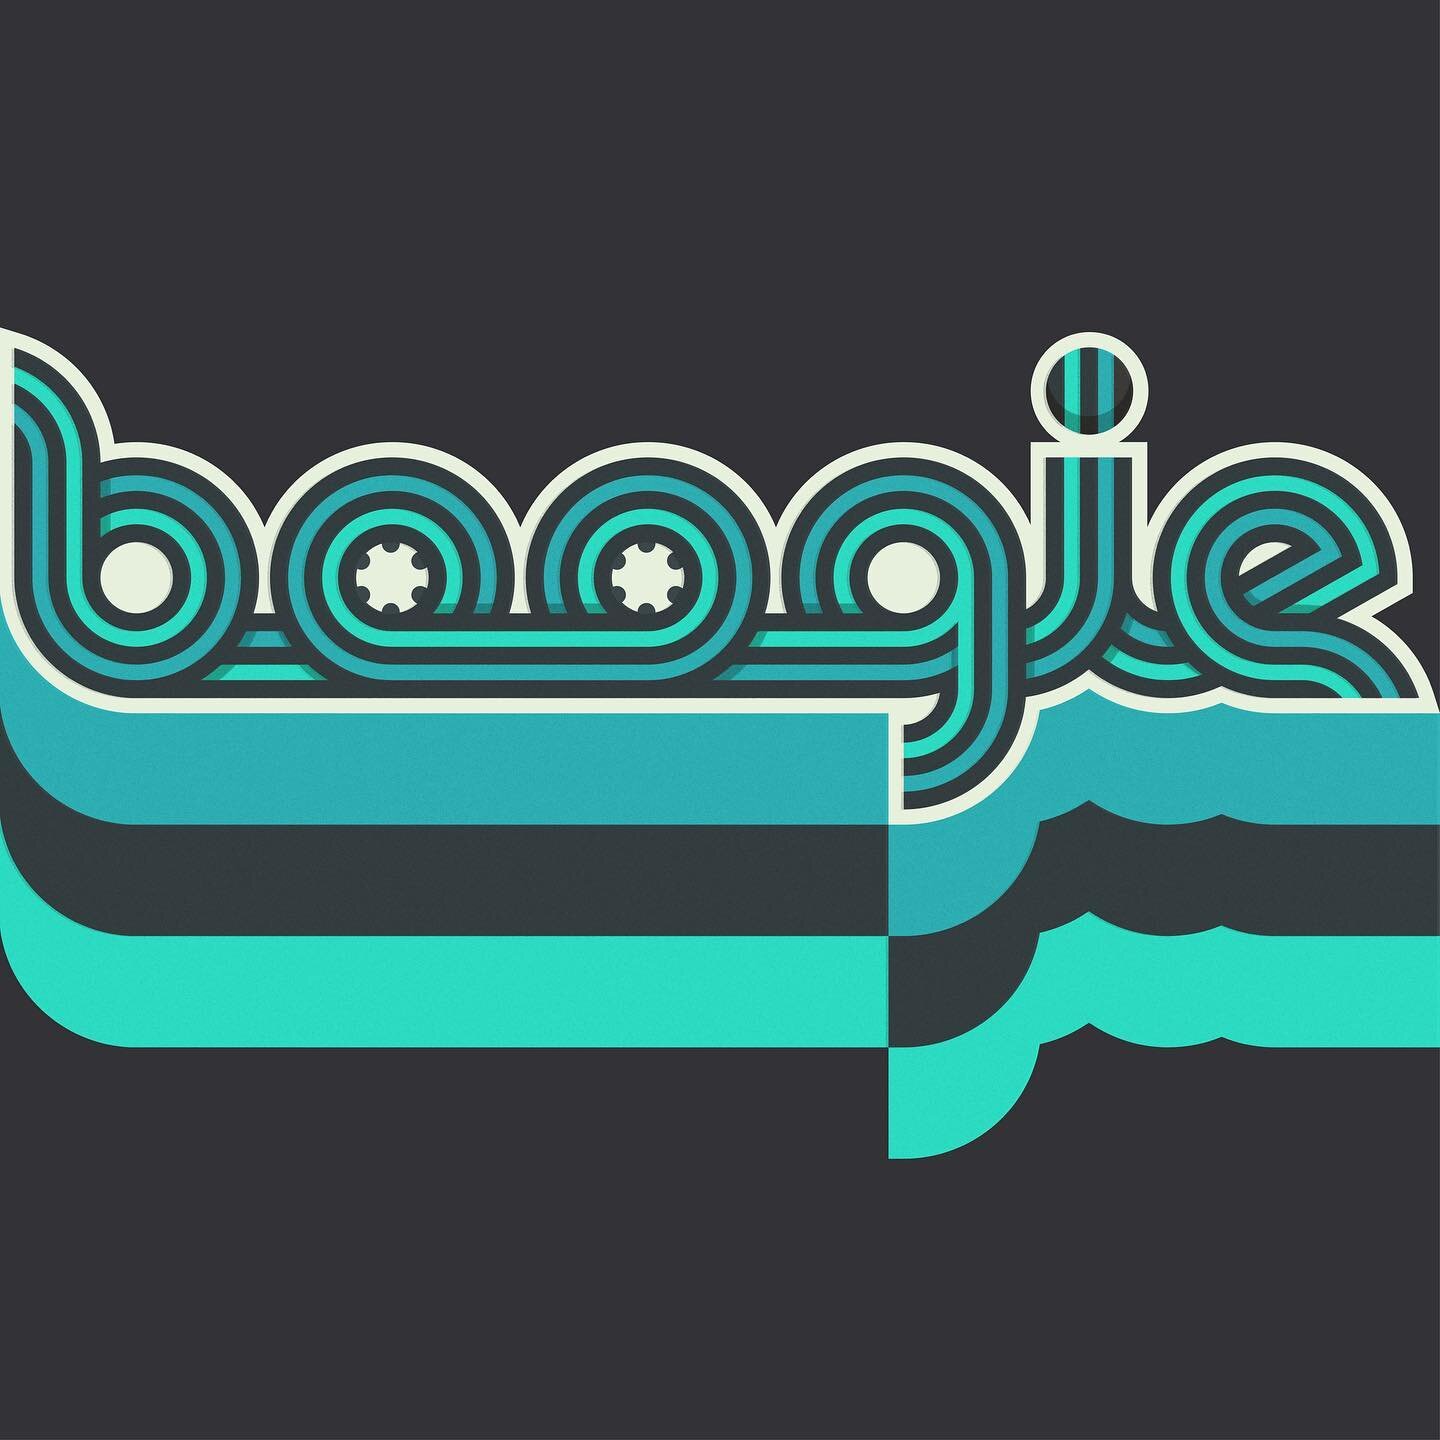 It&rsquo;s a boogie down Friday, here&rsquo;s your Boogie Band! Logo #2 of the Ripcord project was a total blast. 
.
.
.
.
.
.
.
.
.
.
.
.
#logo&nbsp;#logodesign&nbsp;#geometric #geometriclogo #fatlines #fatlineslogo #obiedesignstudio&nbsp;#branding&